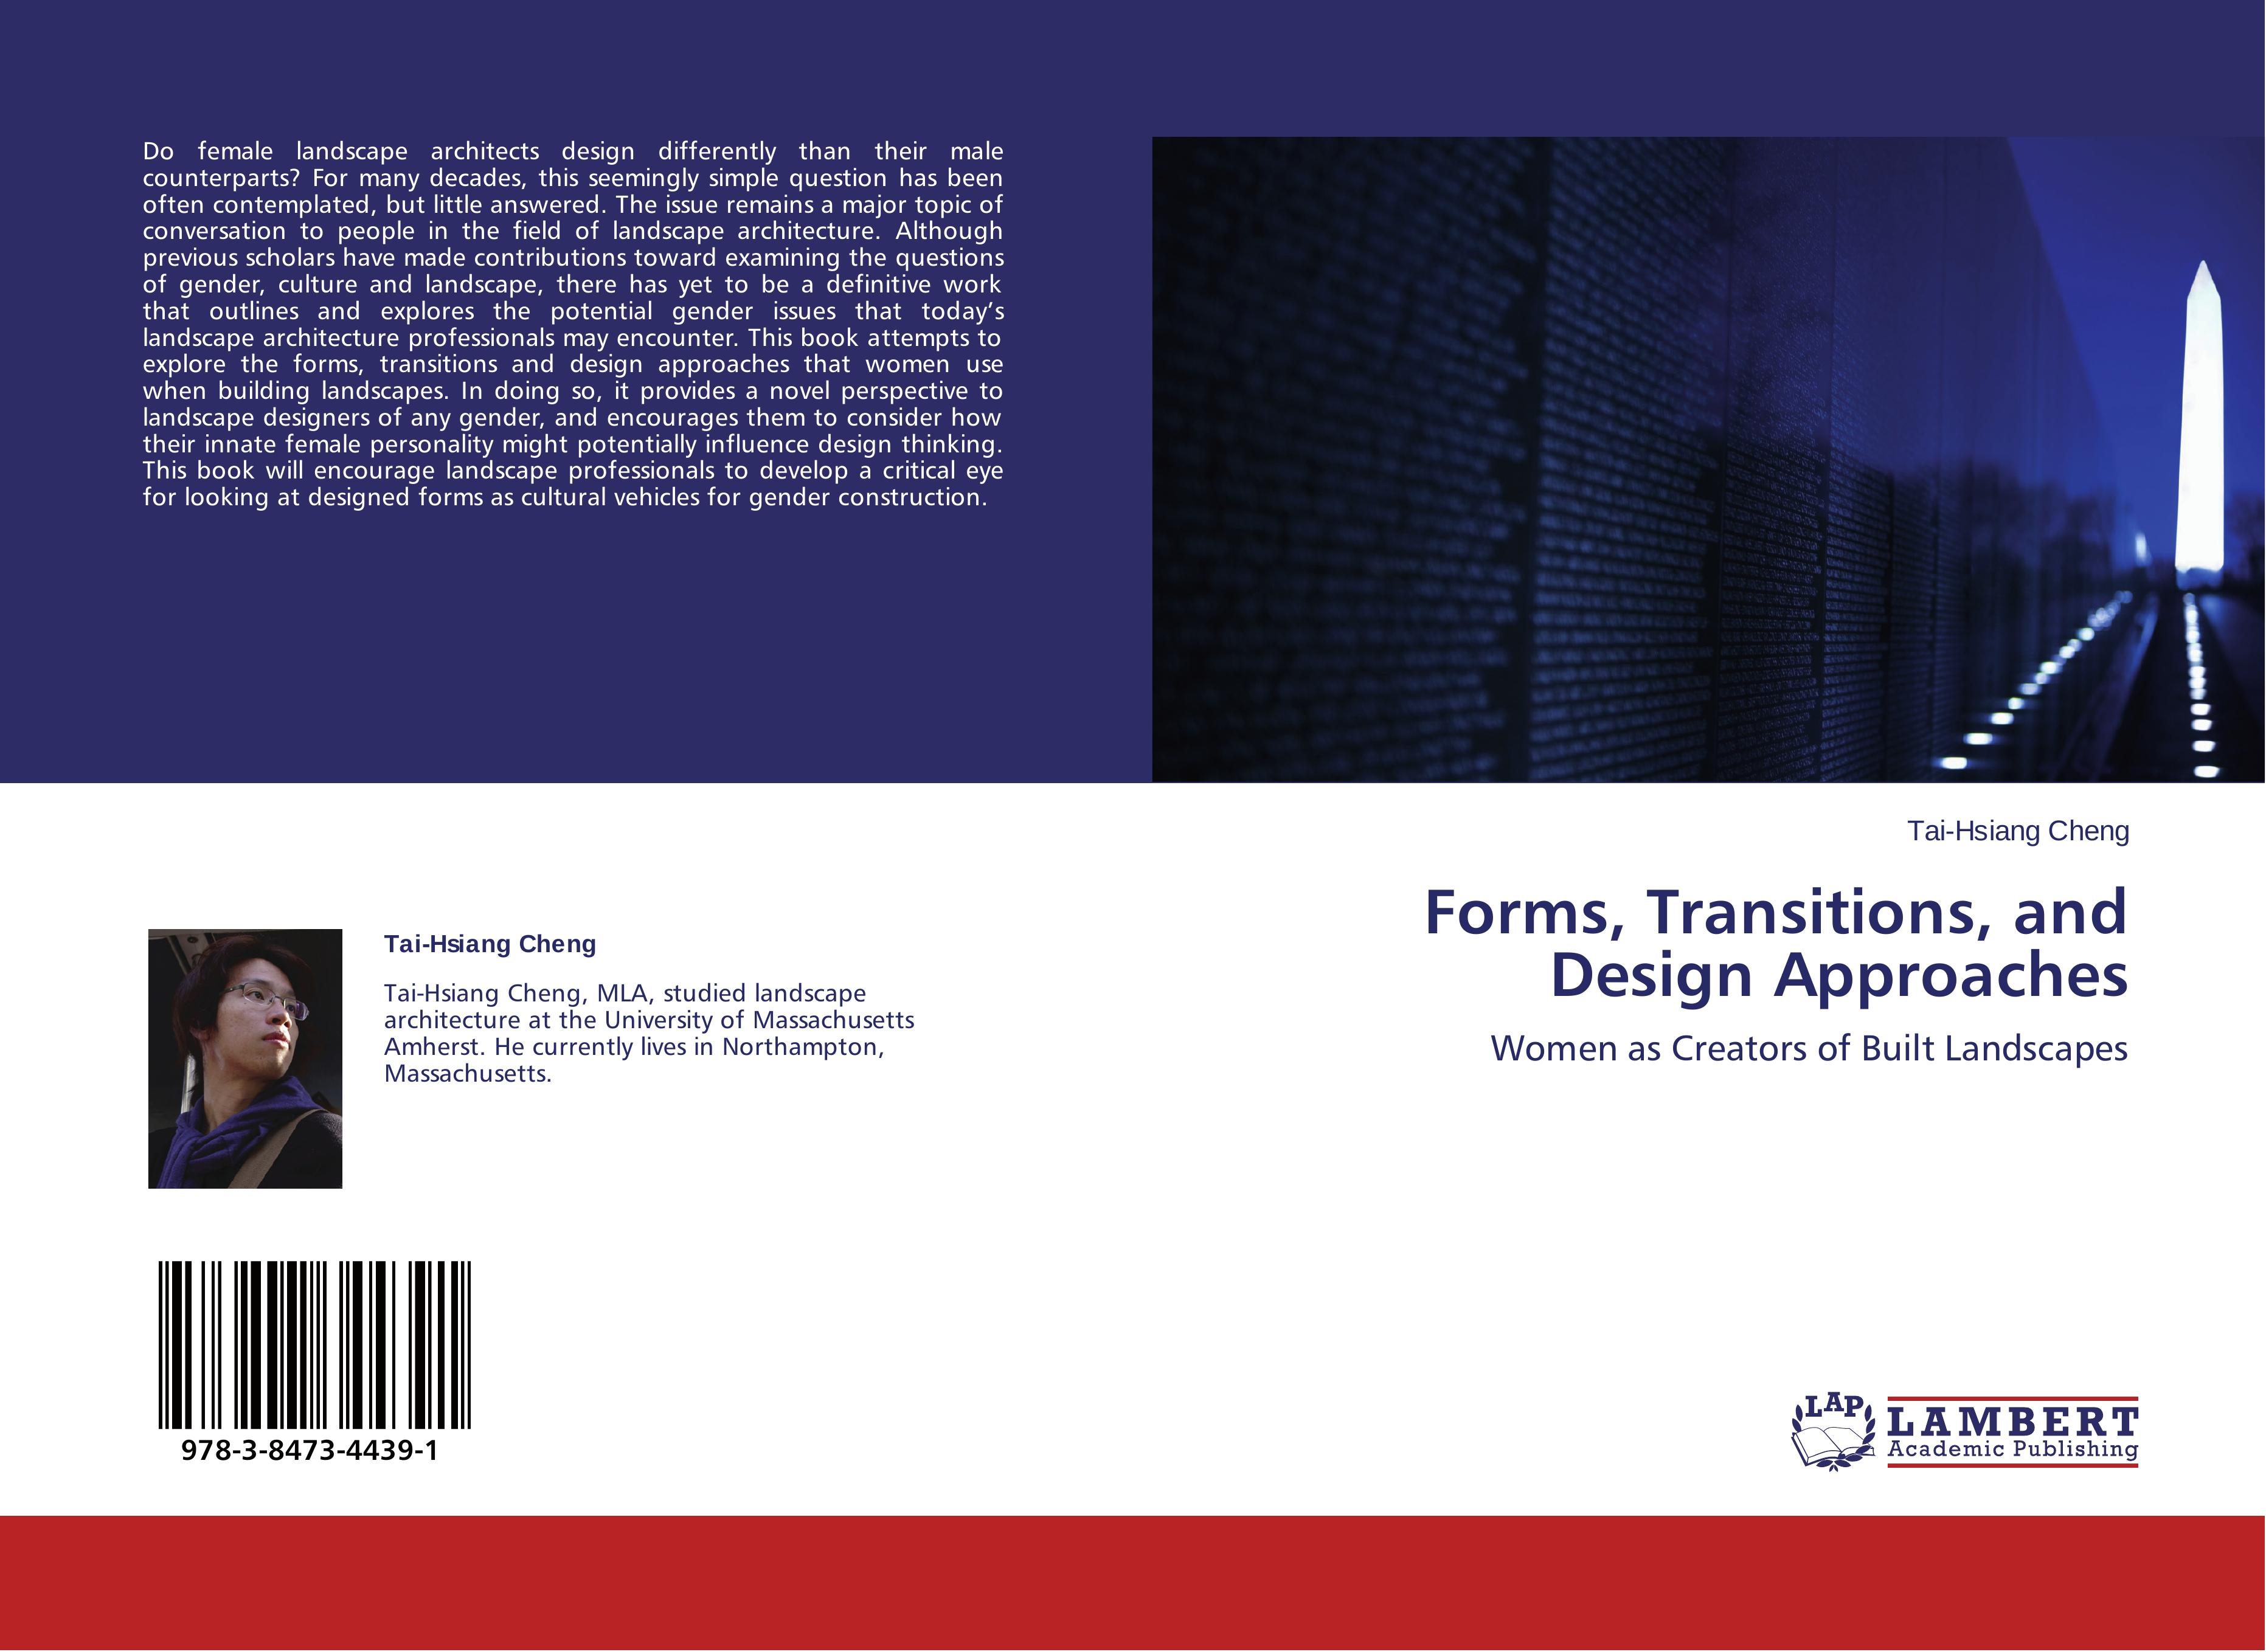 Forms, Transitions, and Design Approaches - Tai-Hsiang Cheng